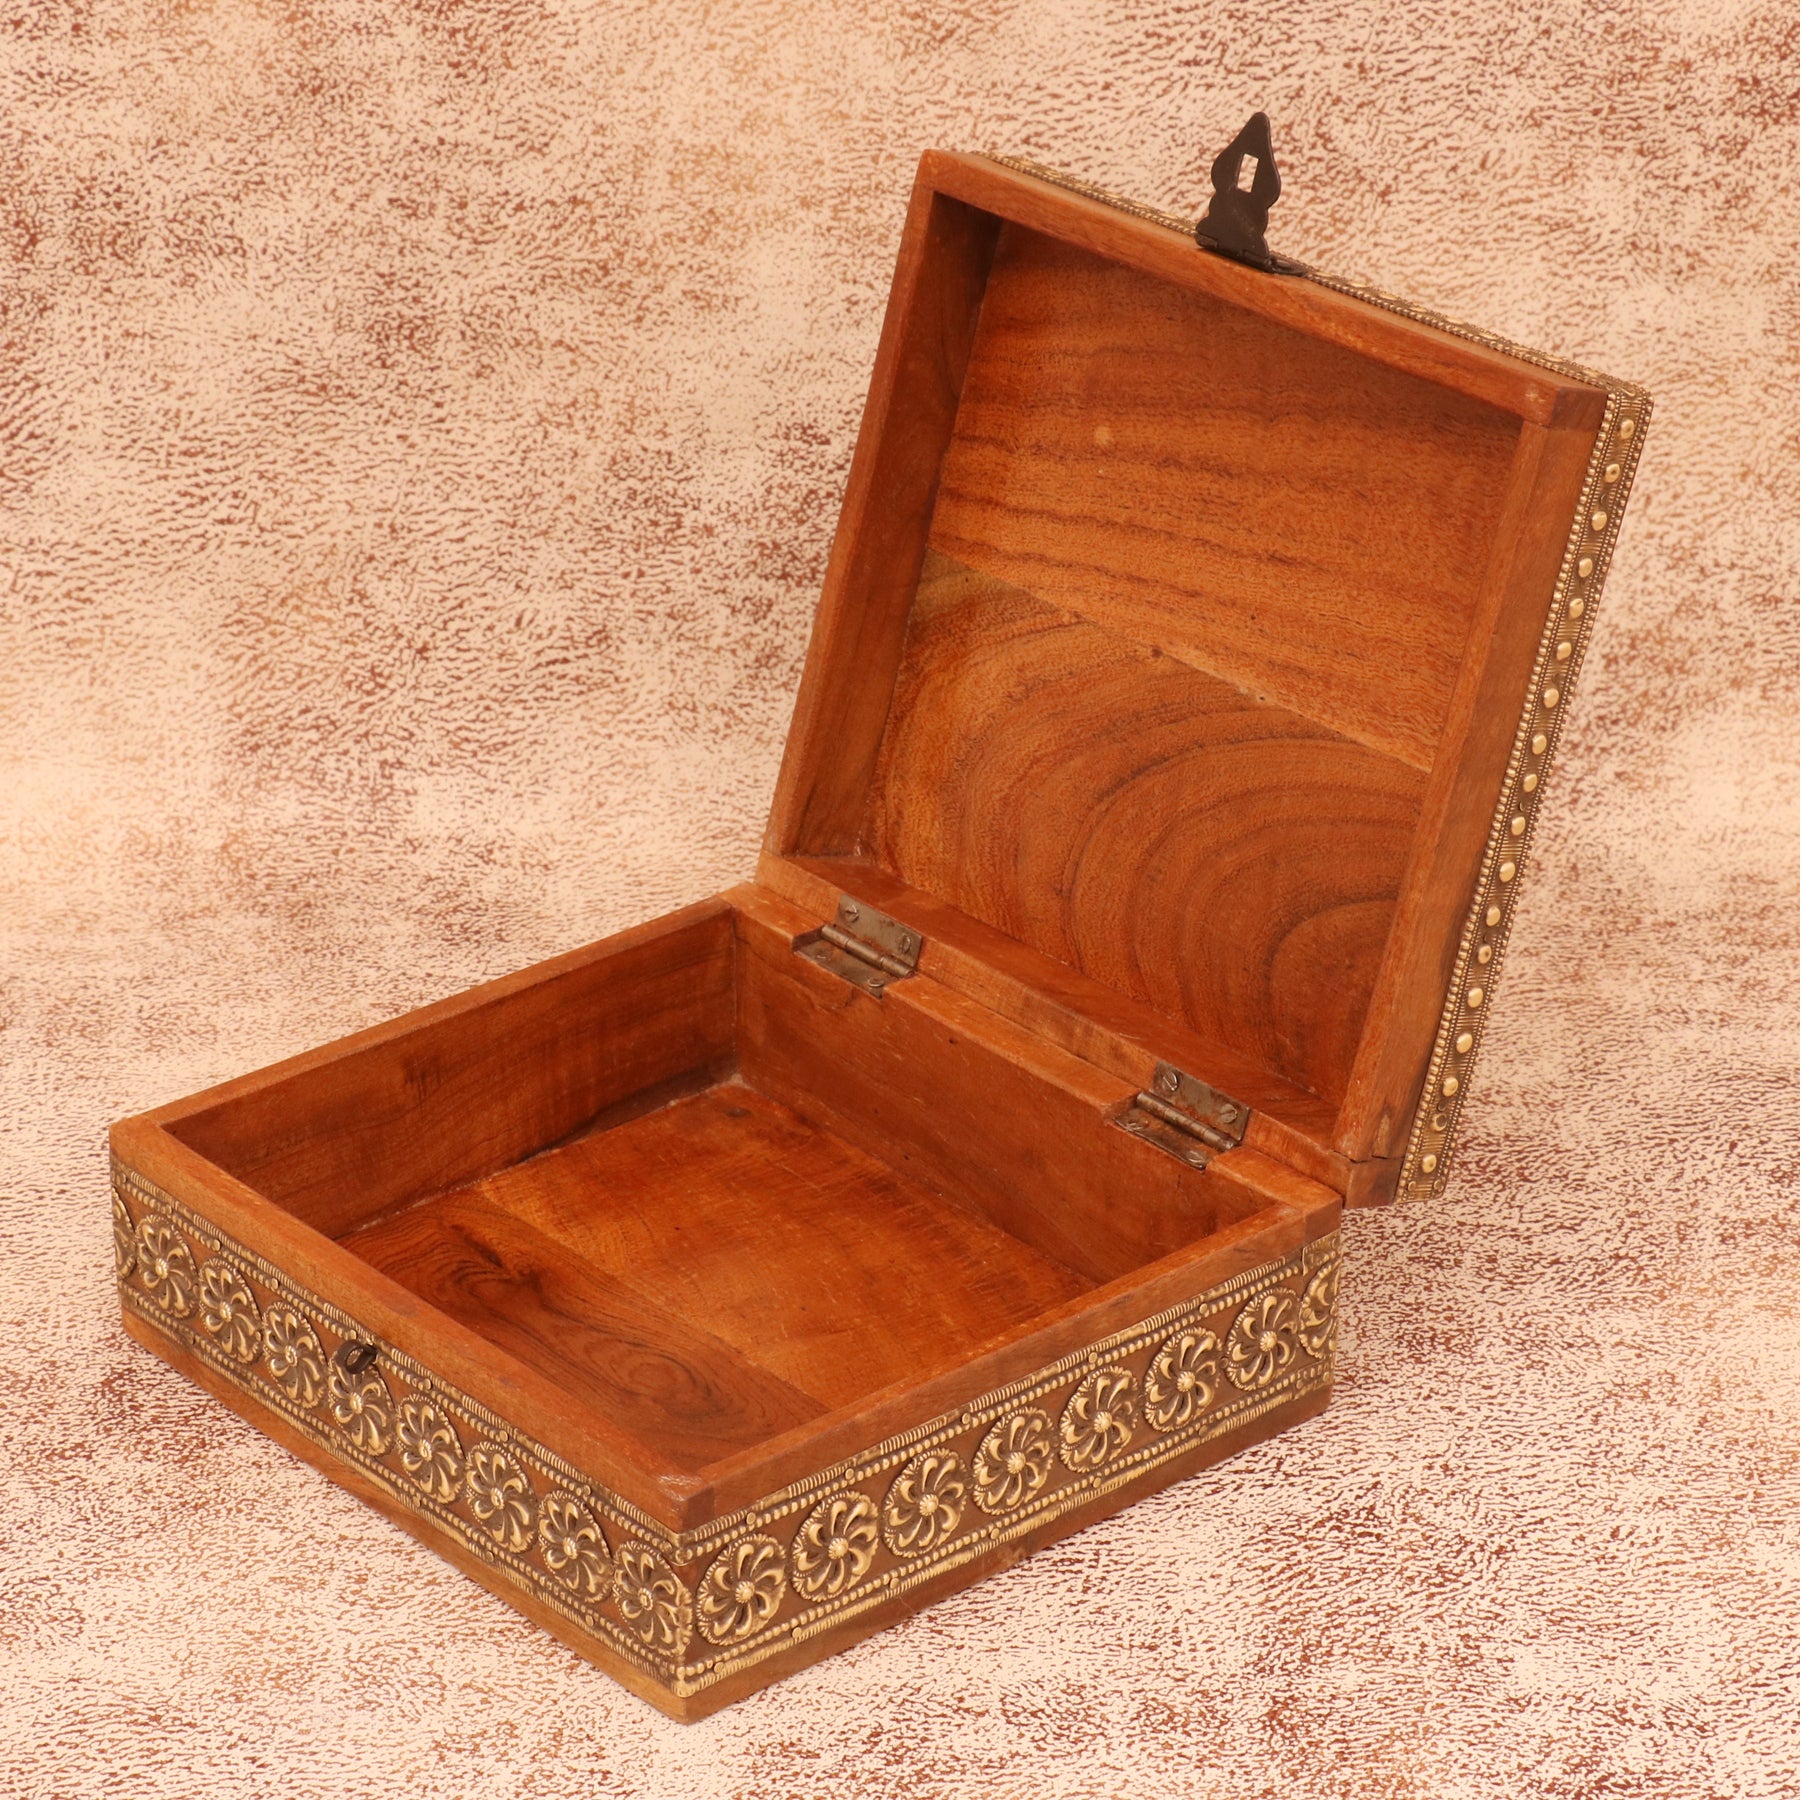 Wooden Wide Boxes Medium (8 x 7.5 x 4 Inch) Wooden Box